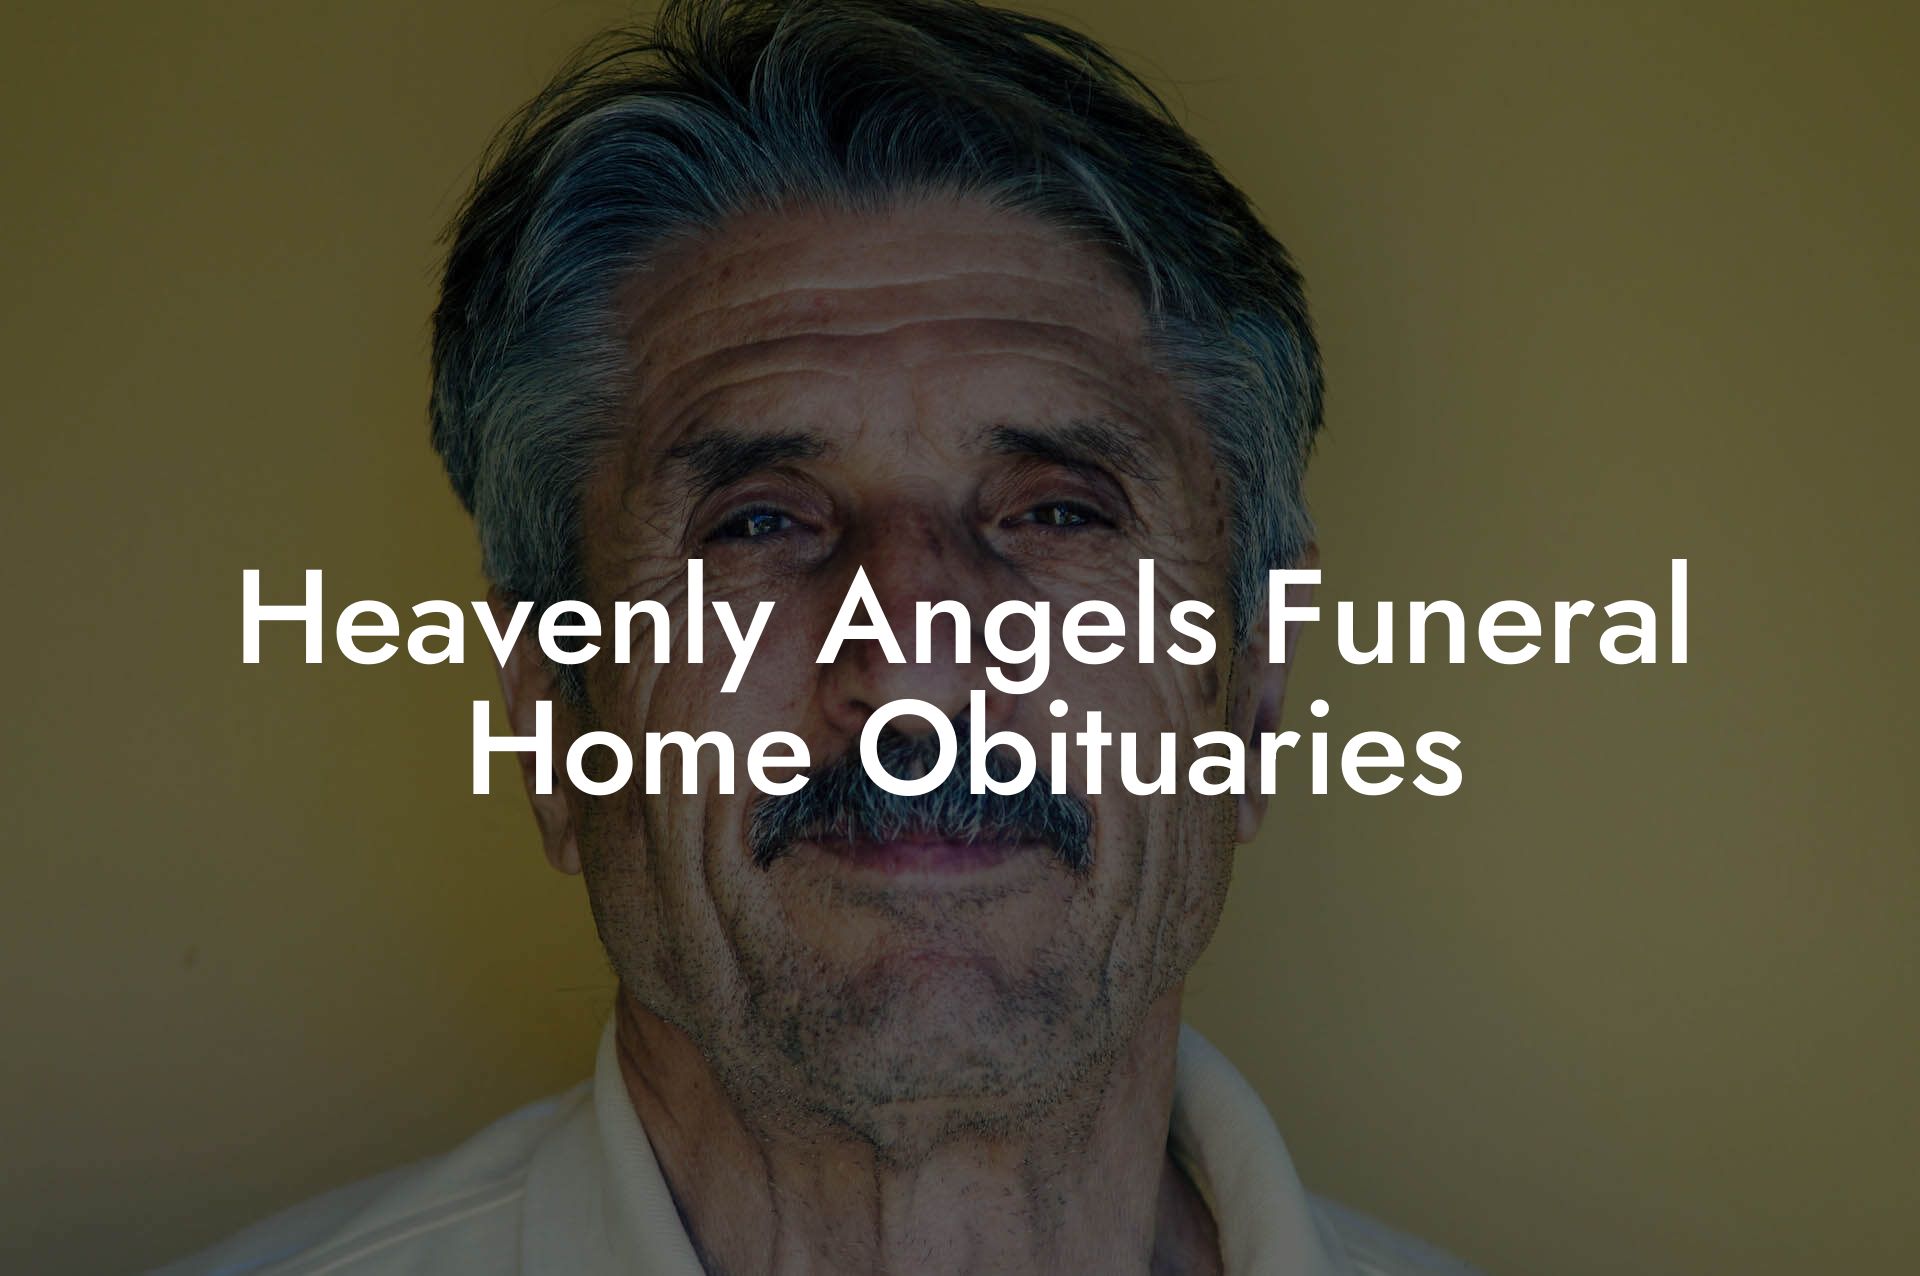 Heavenly Angels Funeral Home Obituaries